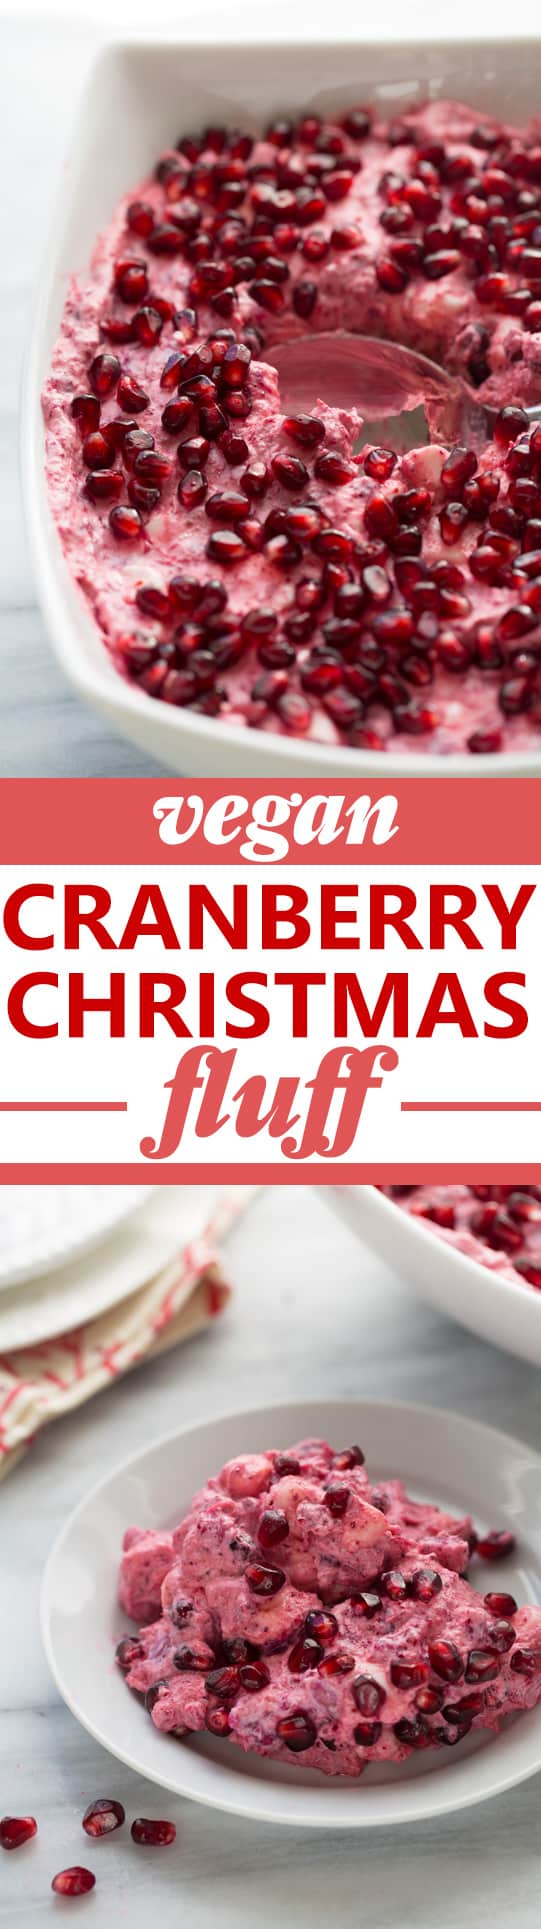 Vegan Christmas Cranberry Fluff! This gluten-free/dairy-free side will steal the show at any holiday gathering!